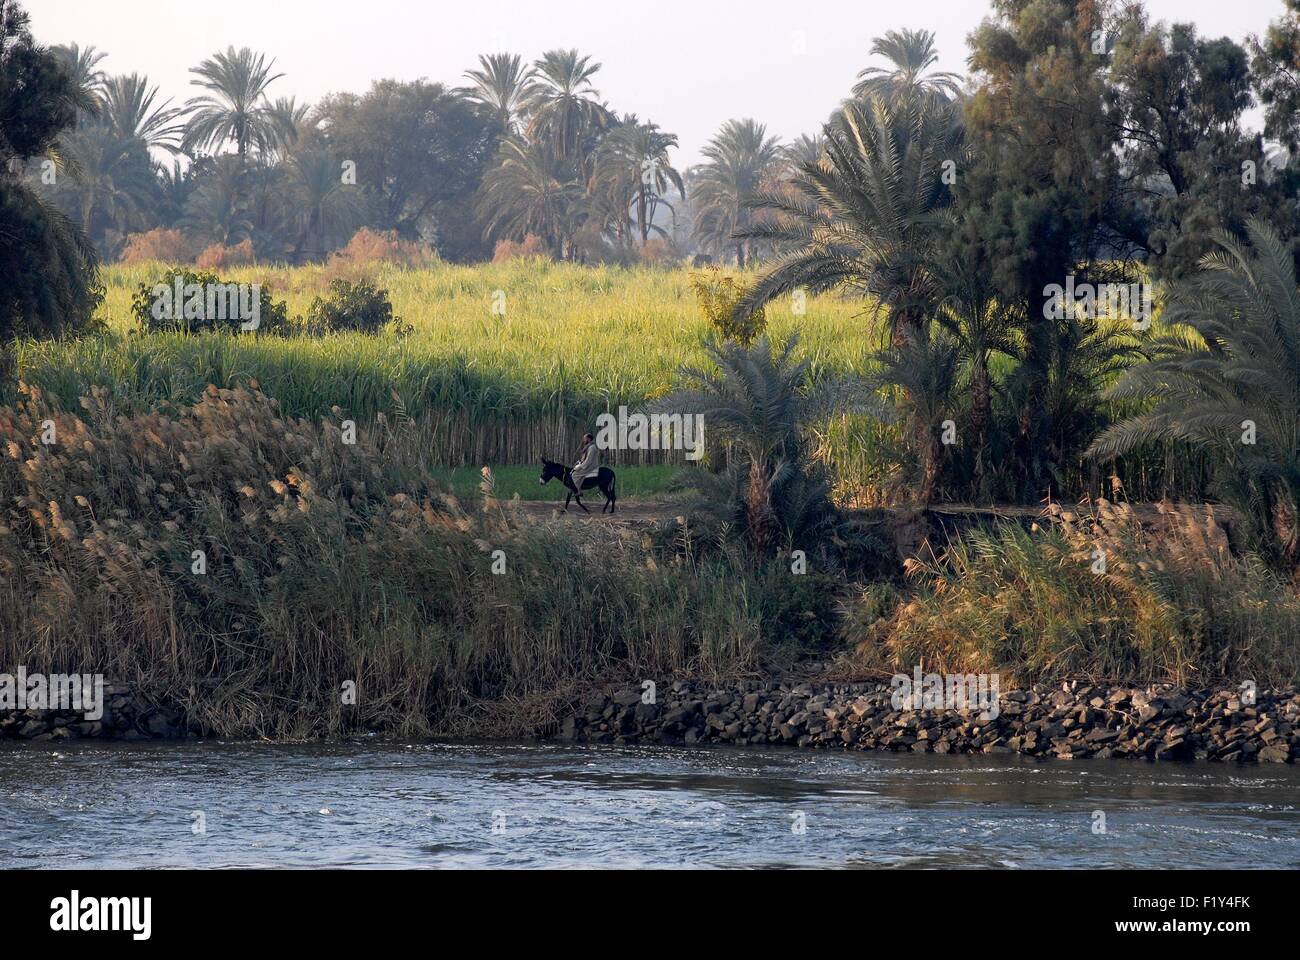 Egypt, Upper Egypt, Nile Valley, Luxor, on the west bank of the Nile, a farmer through the fields on a donkey Stock Photo